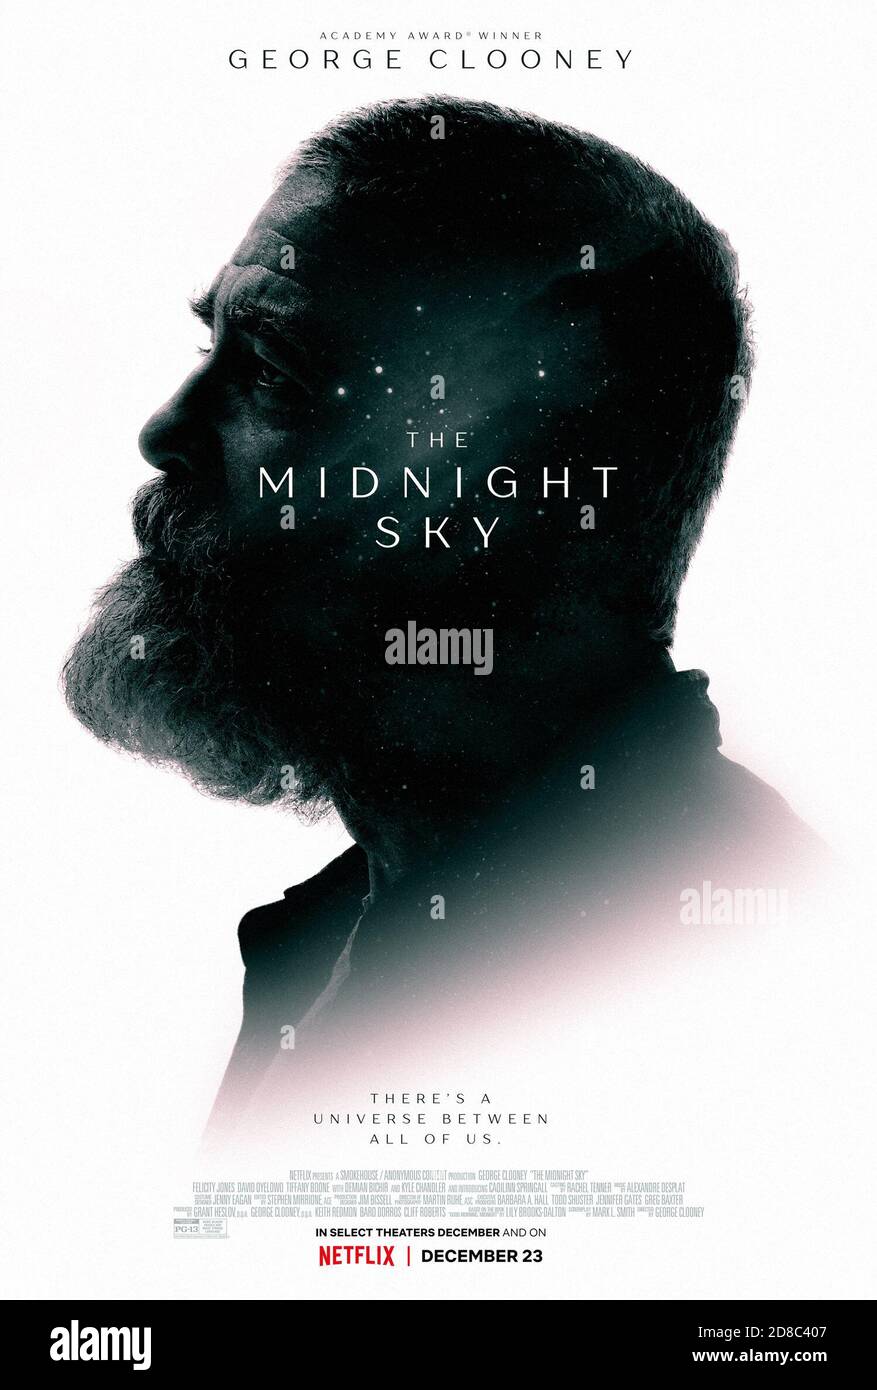 RELEASE DATE: TITLE: December 23, 2020 The Midnight Sky STUDIO: Netflix DIRECTOR: George Clooney PLOT: This post-apocalyptic tale follows Augustine, a lonely scientist in the Arctic, as he races to stop Sully and her fellow astronauts from returning home to a mysterious global catastrophe. STARRING: GEORGE CLOONEY as Augustine poster art. (Credit Image: © Netflix/Entertainment Pictures) Stock Photo